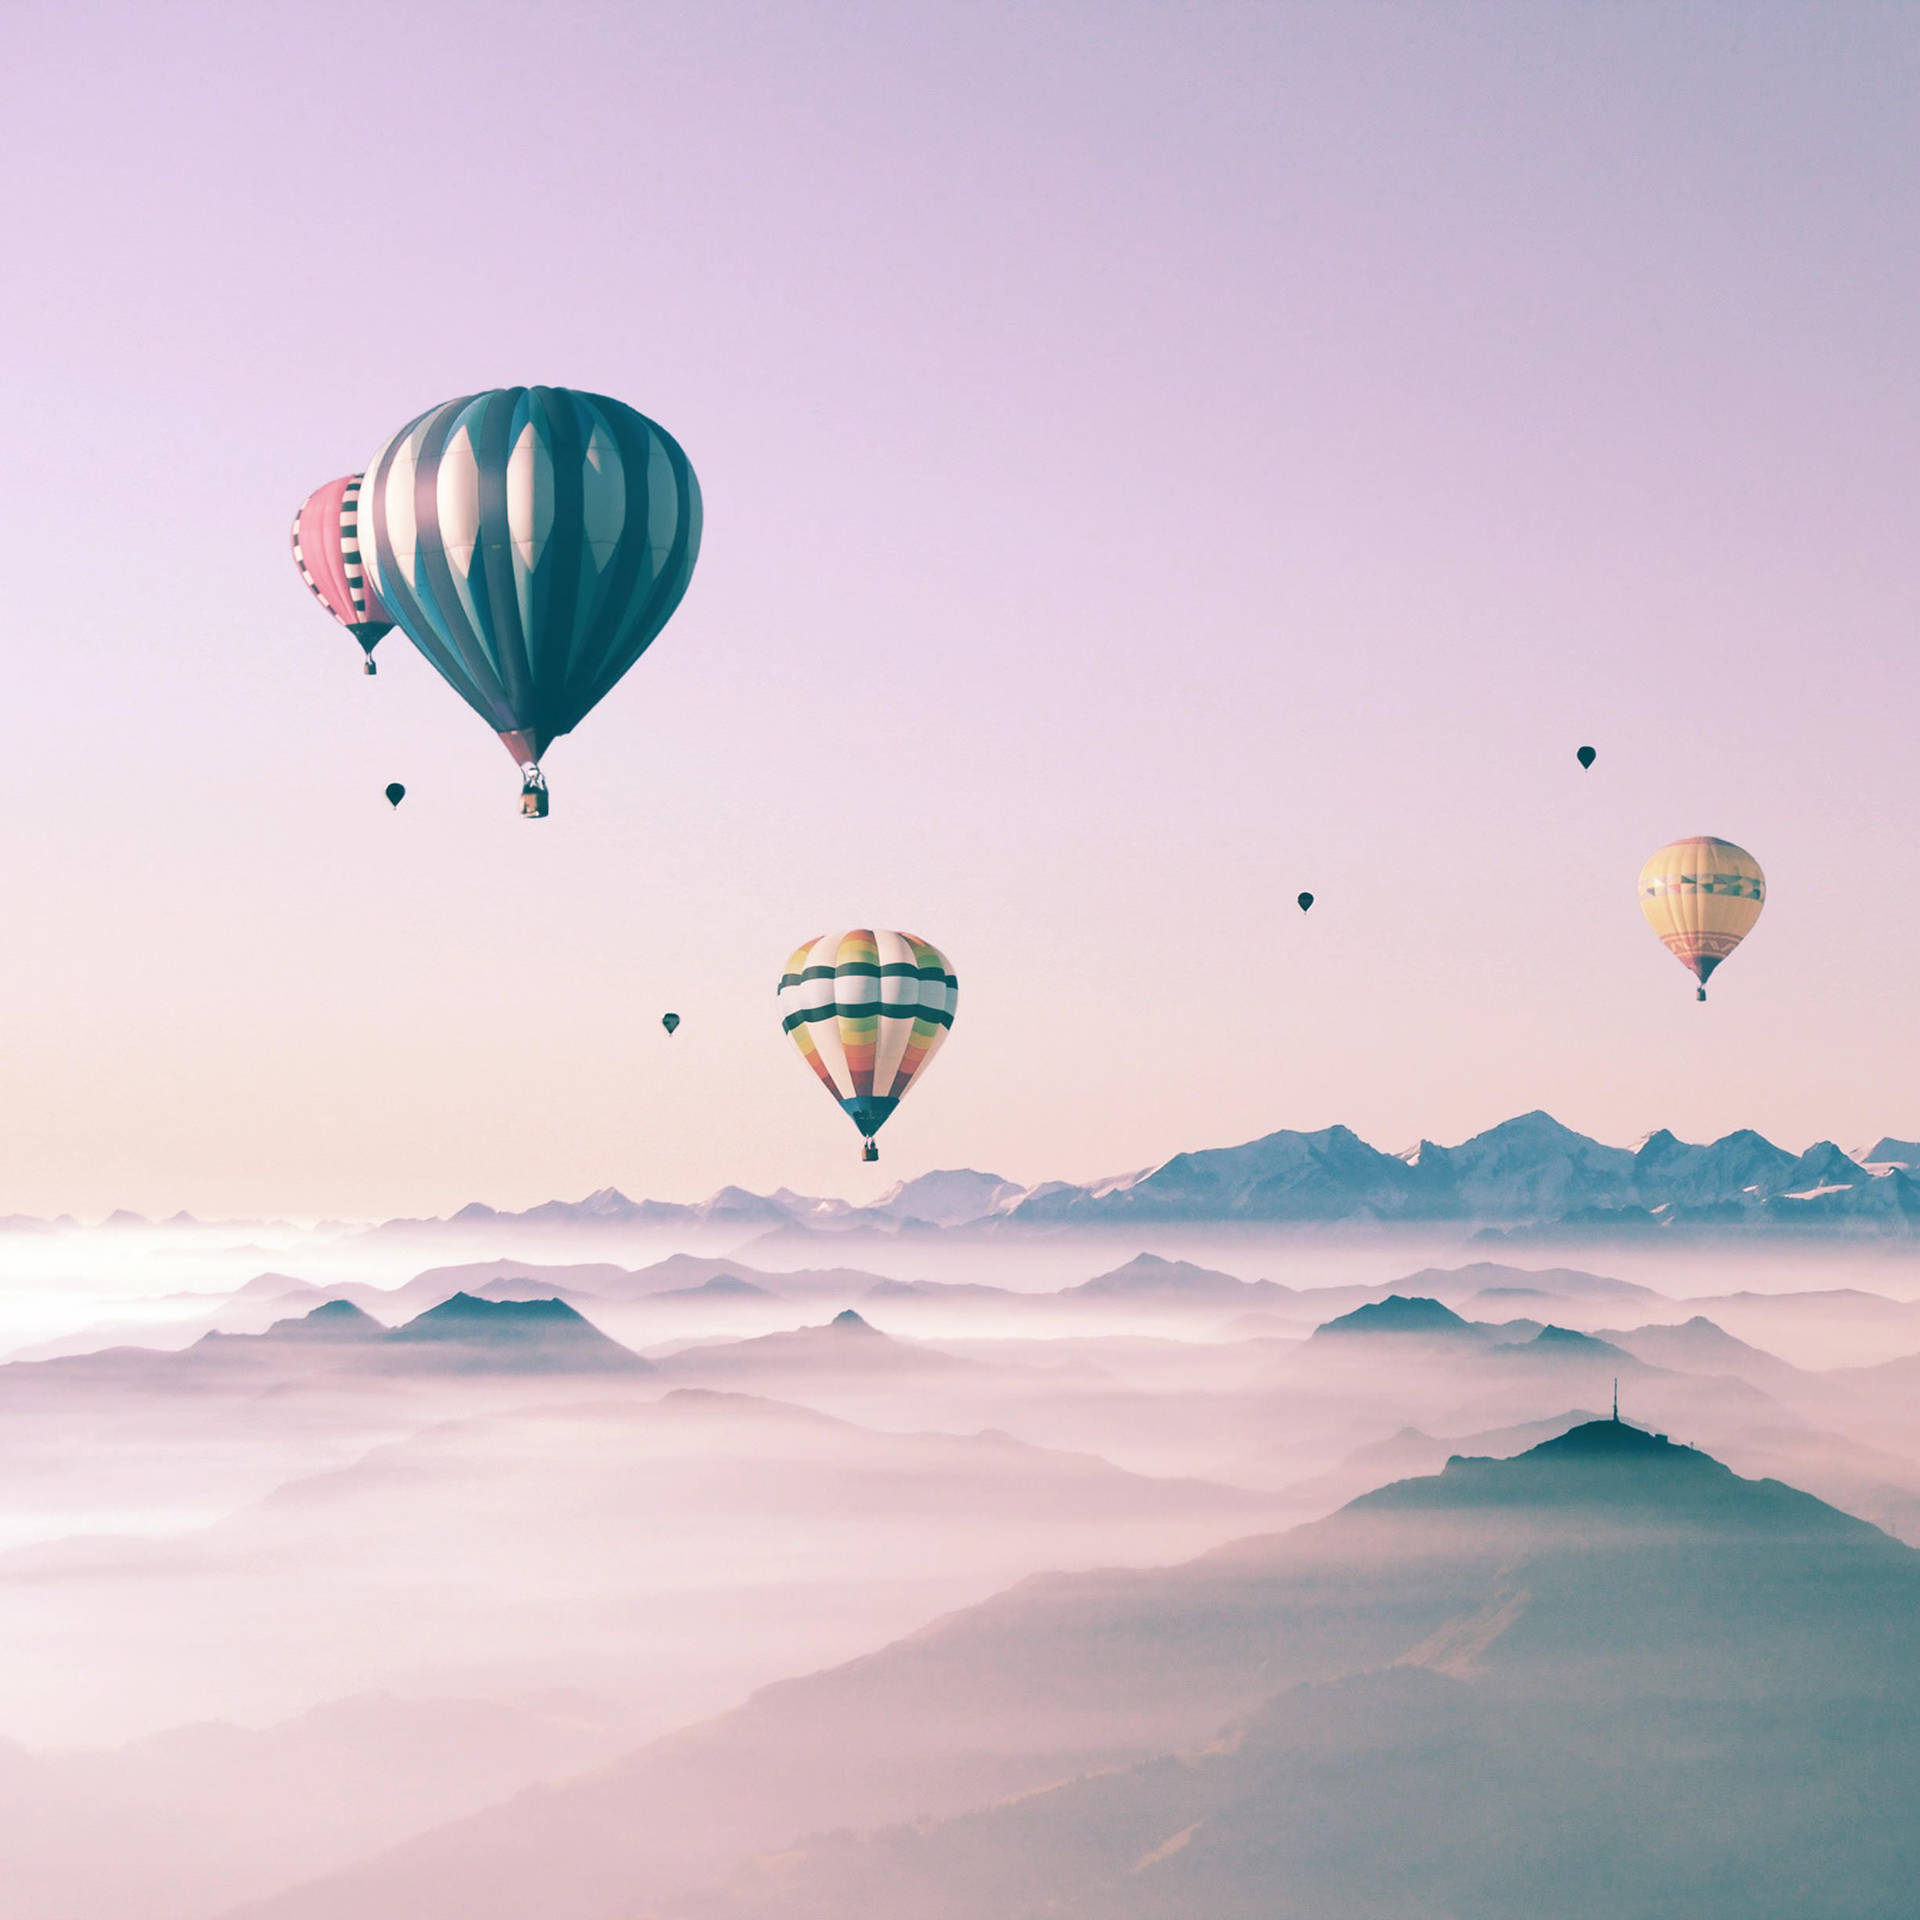 Colorful Hot Air Balloons Soaring In A Beautiful Sky Displayed On A Cute Ipad. Background